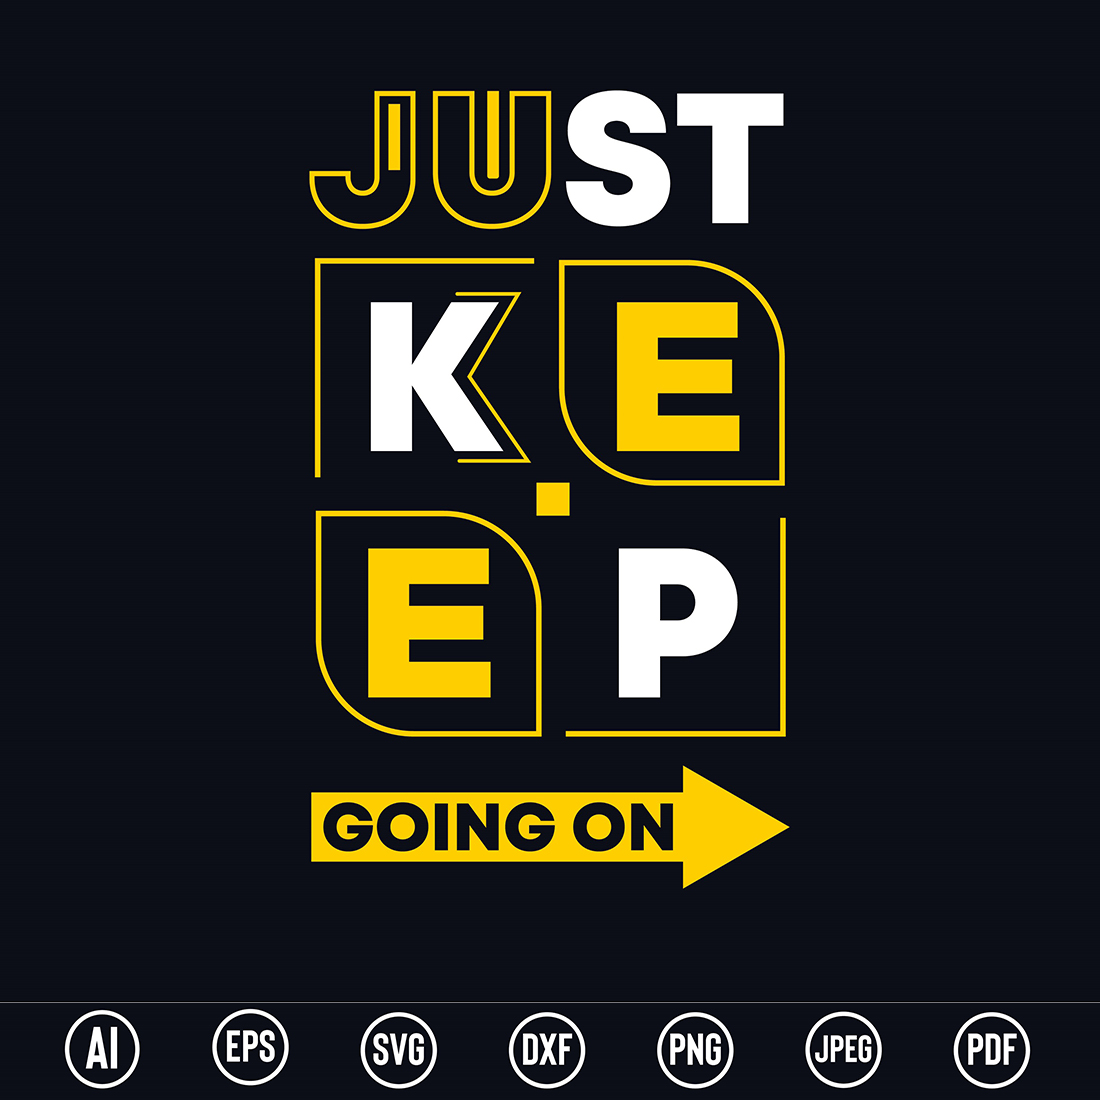 Modern Typography T-Shirt design with “Just keep going on” quote for t-shirt, posters, stickers, mug prints, banners, gift cards, labels etc preview image.